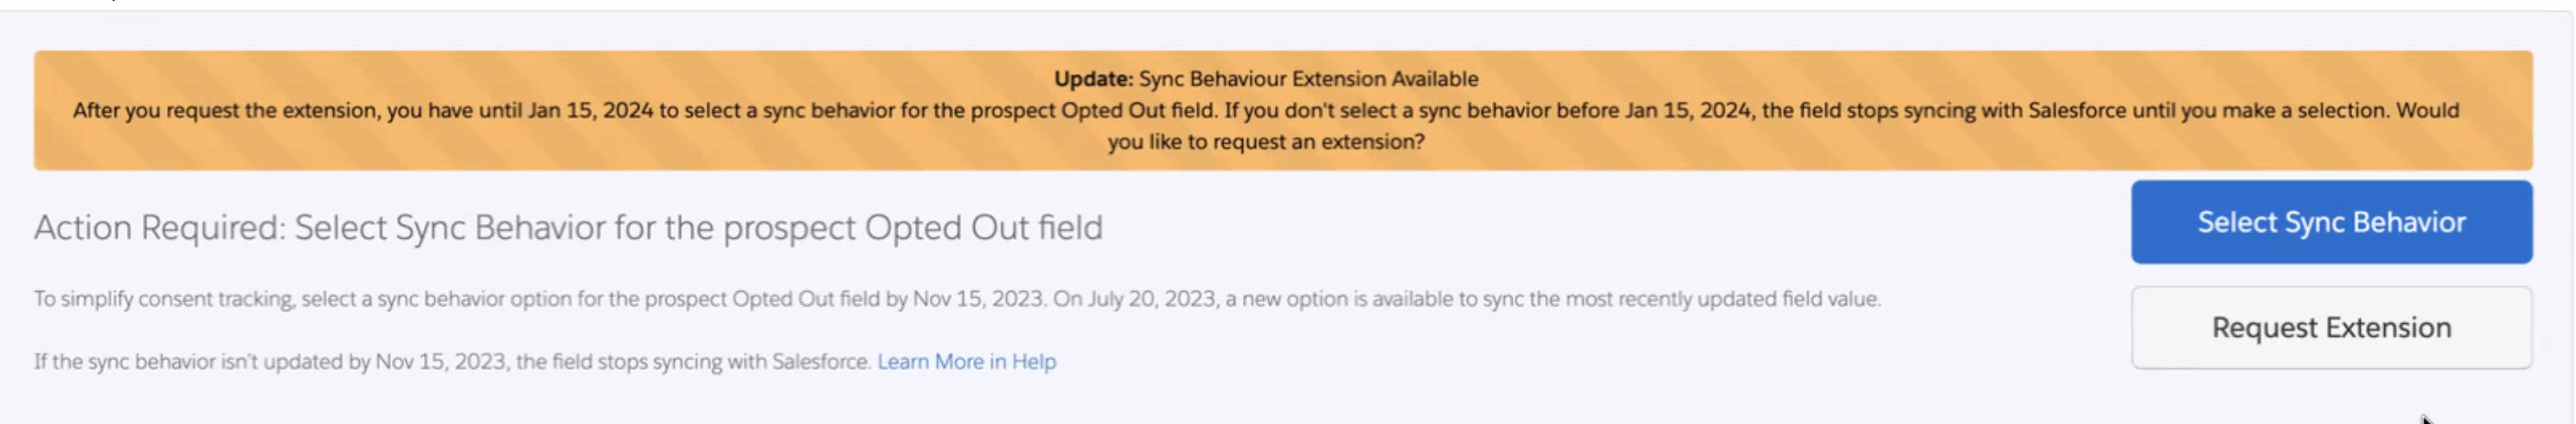 Account Engaegment Opted Out Sync Behavior Extension